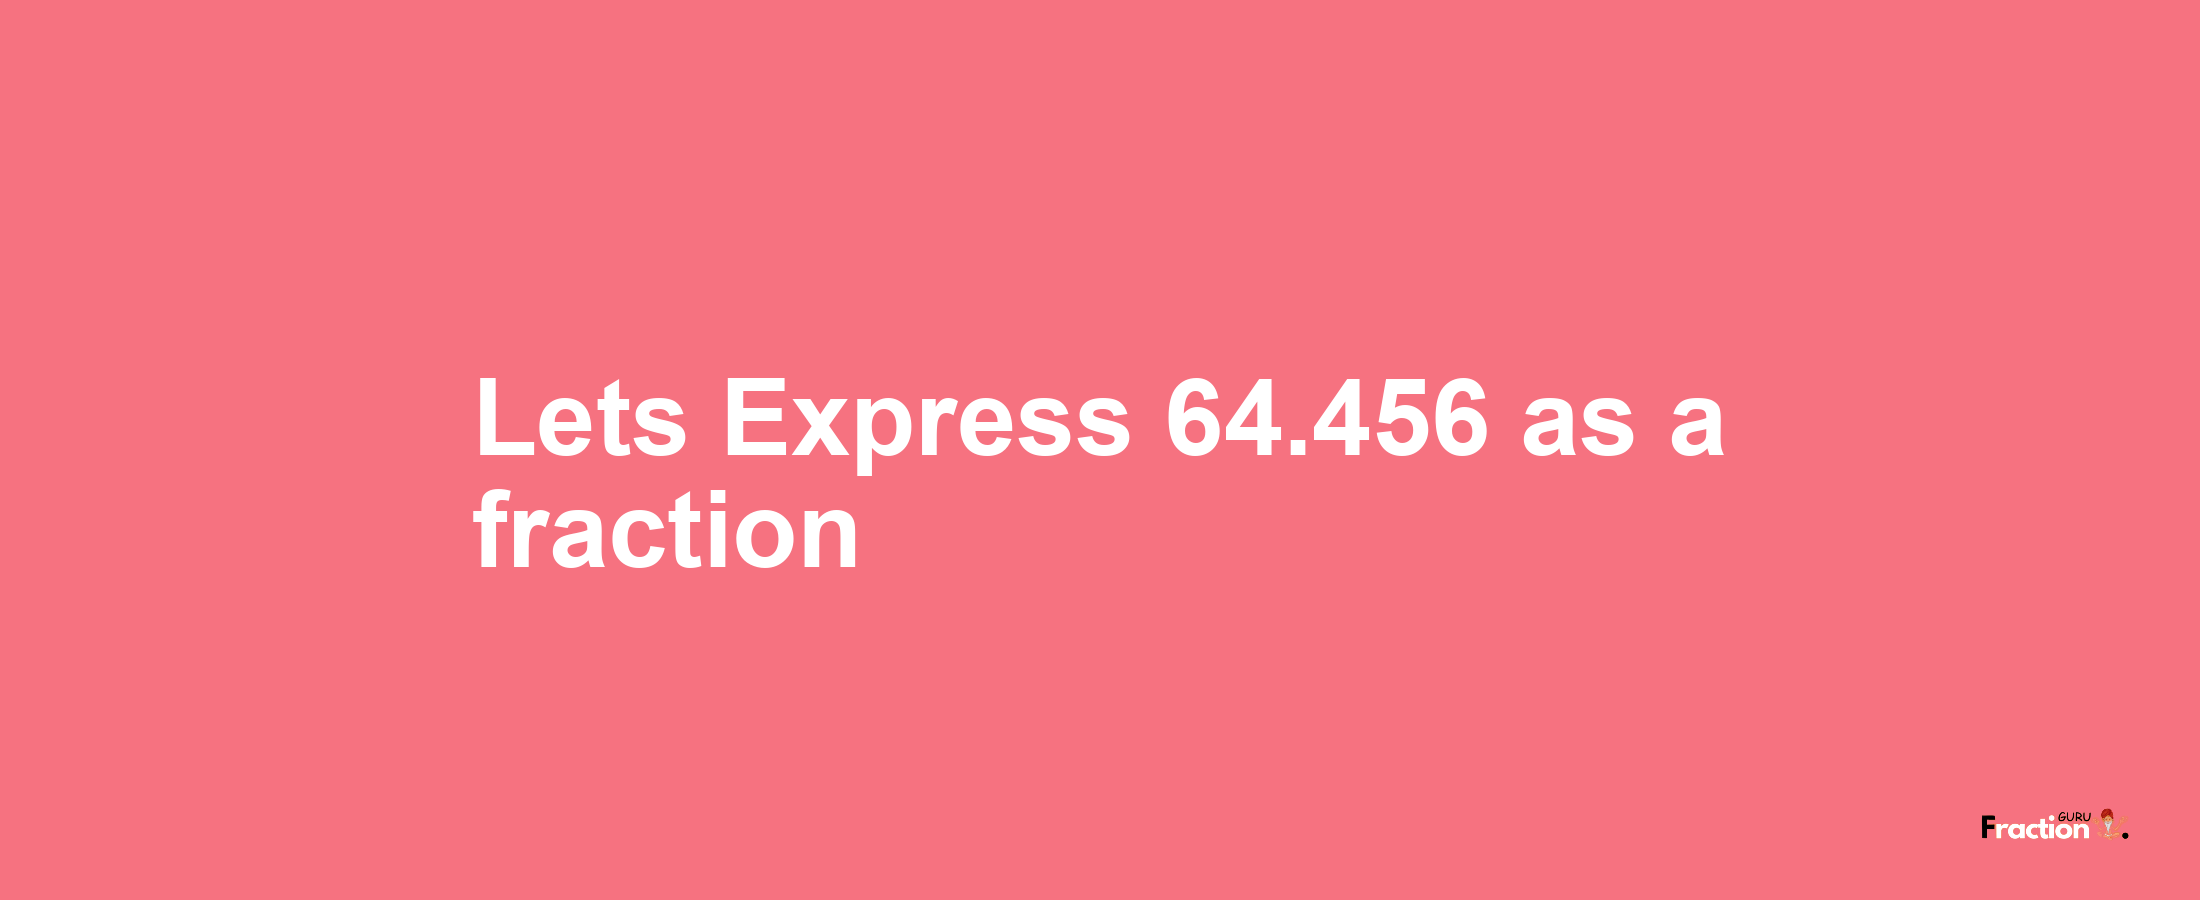 Lets Express 64.456 as afraction